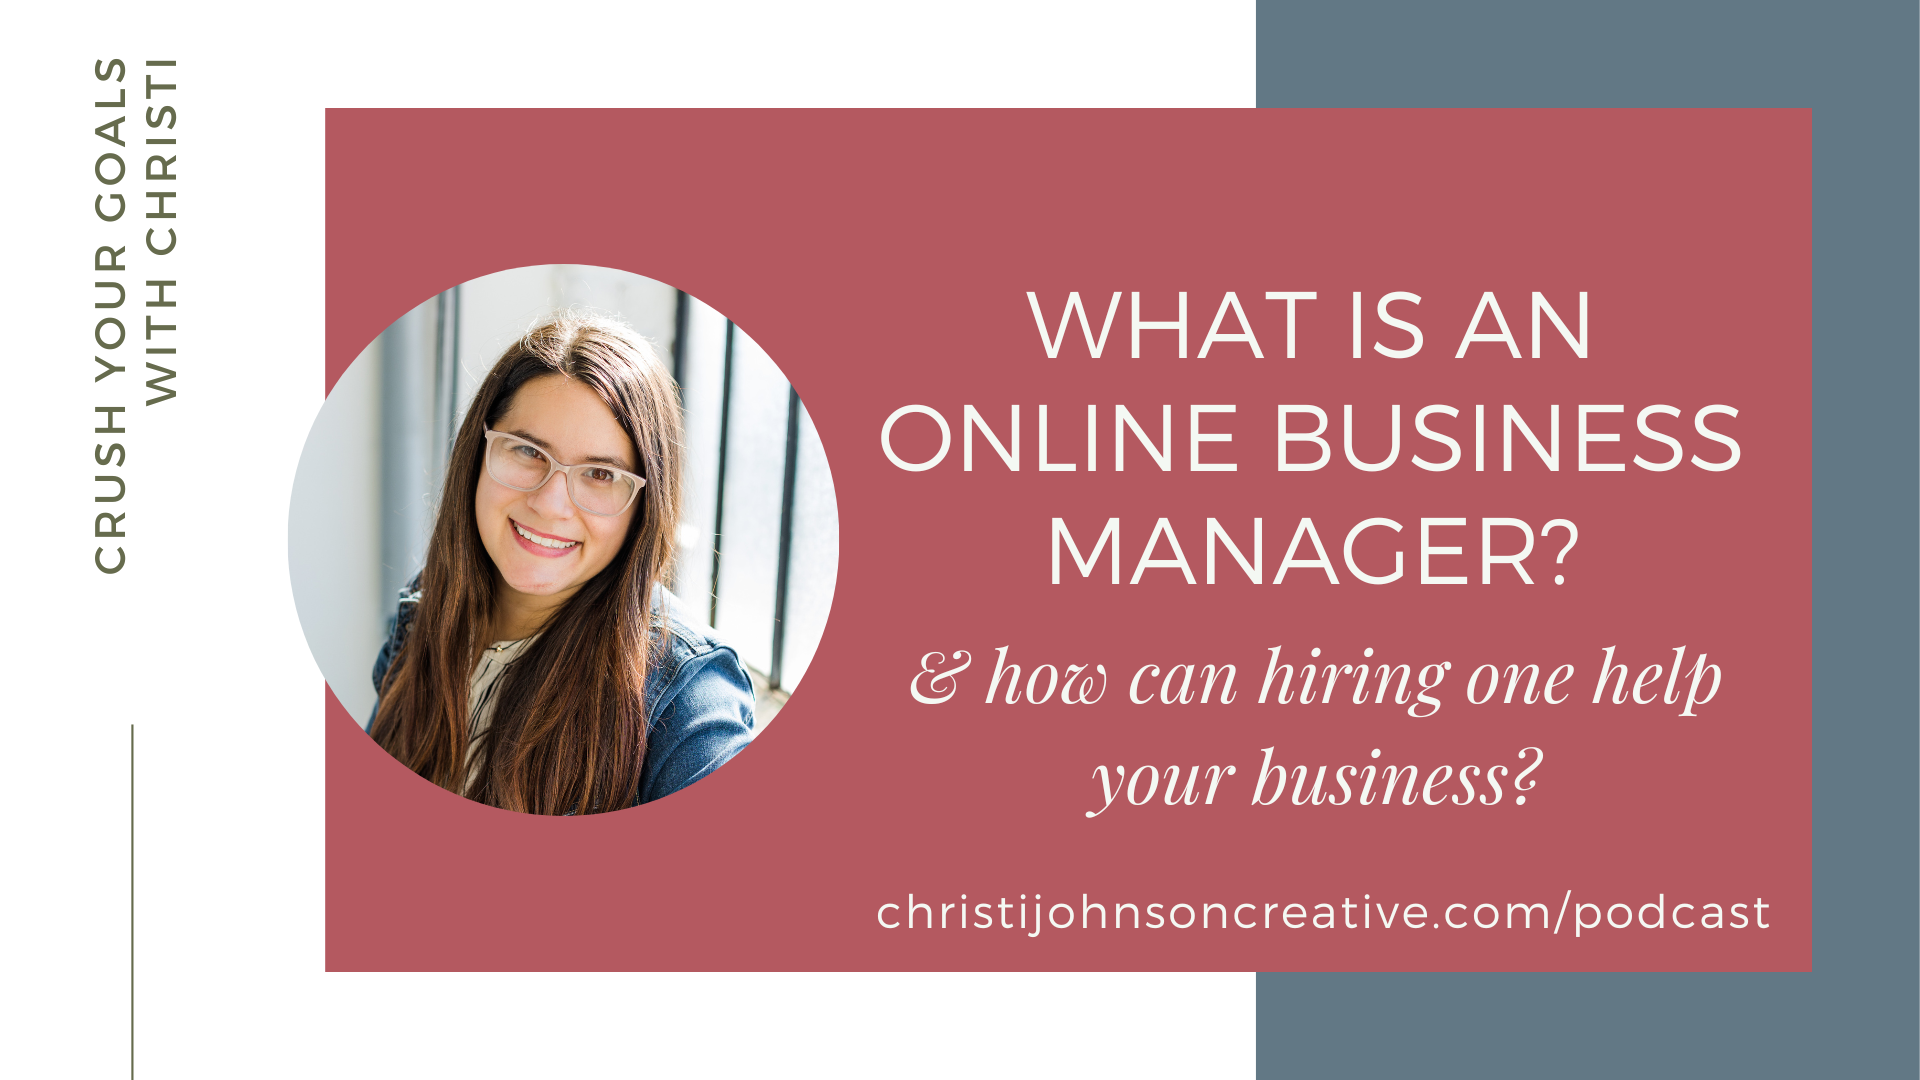 How an Online Business Manager can Help your Business